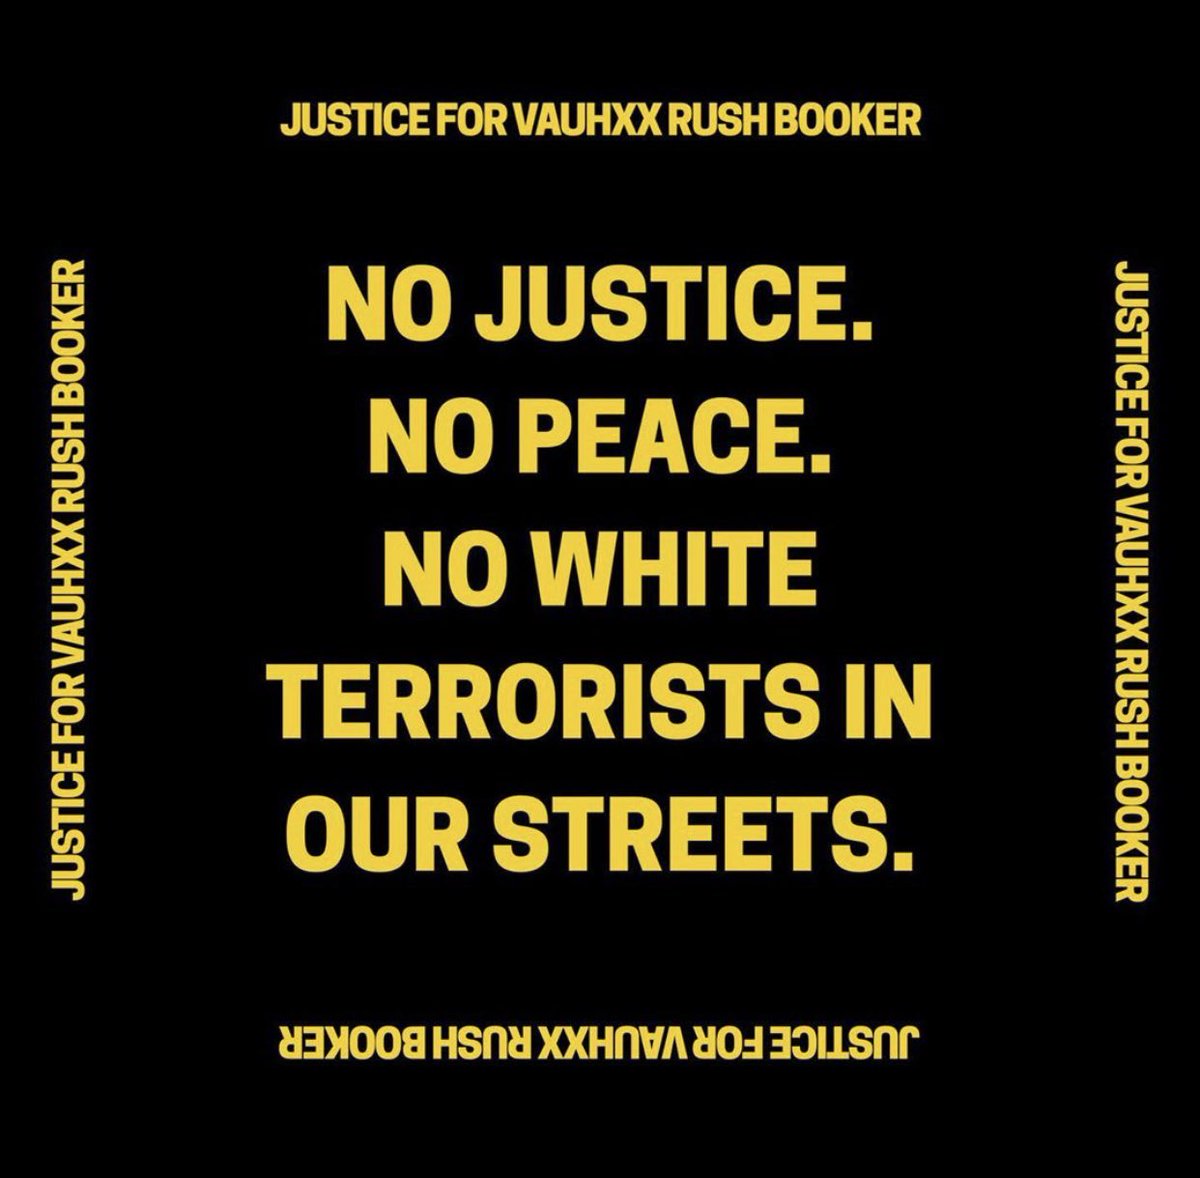 take a moment today to demand justice for vauhxx rush booker, a black man nearly lynched this week in bloomington, indiana. it’s a miracle he’s alive. we need to demand the arrests of these heinously racist and violent men before they strike again. more info below